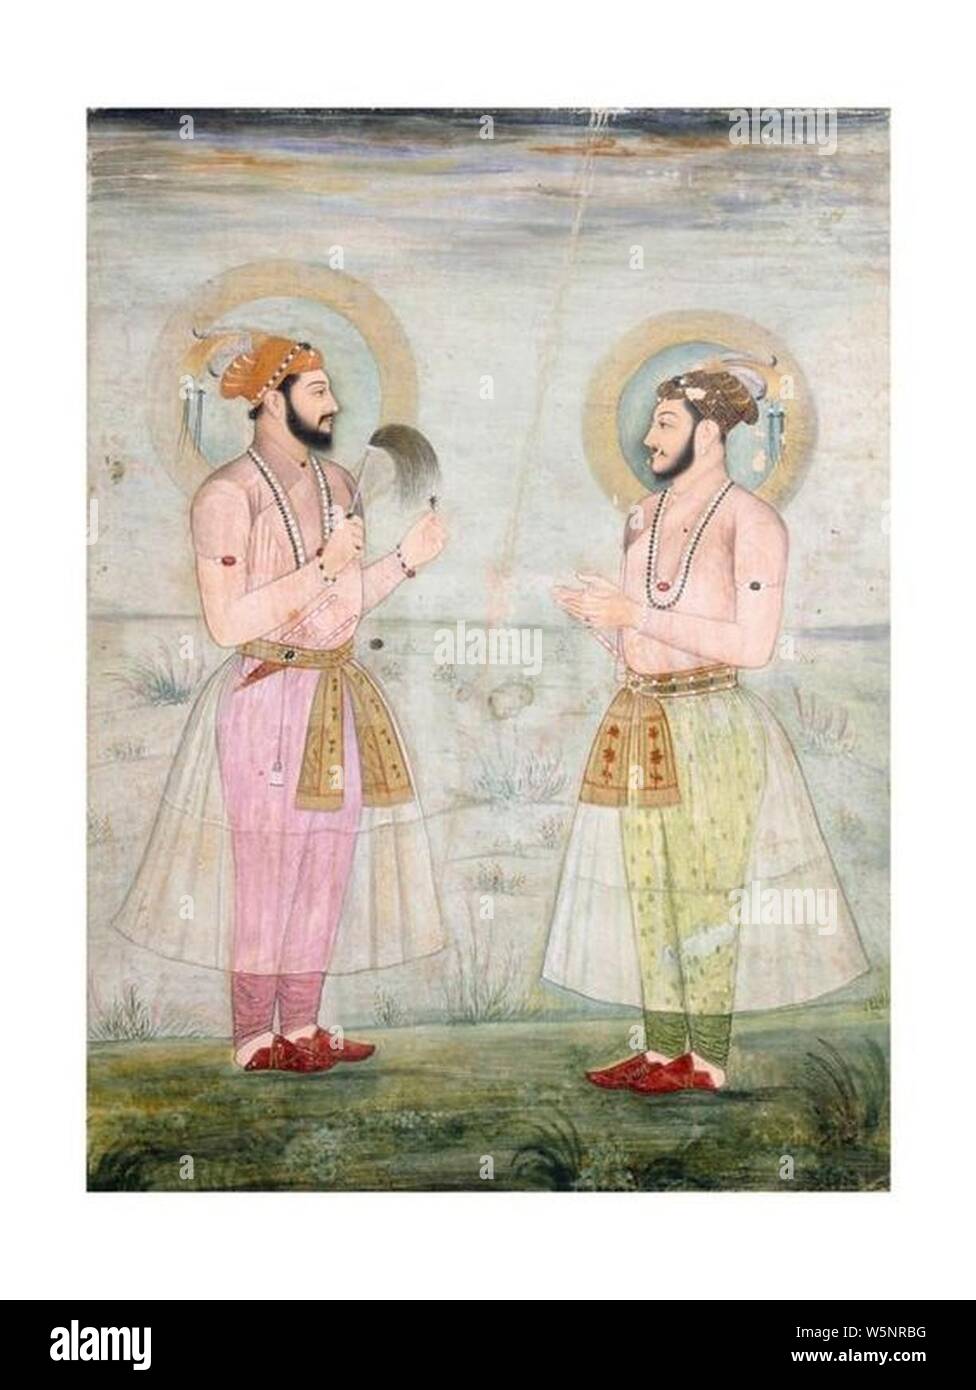 Dara Shikoh (left) with Sulaiman Shikoh (right). Stock Photo